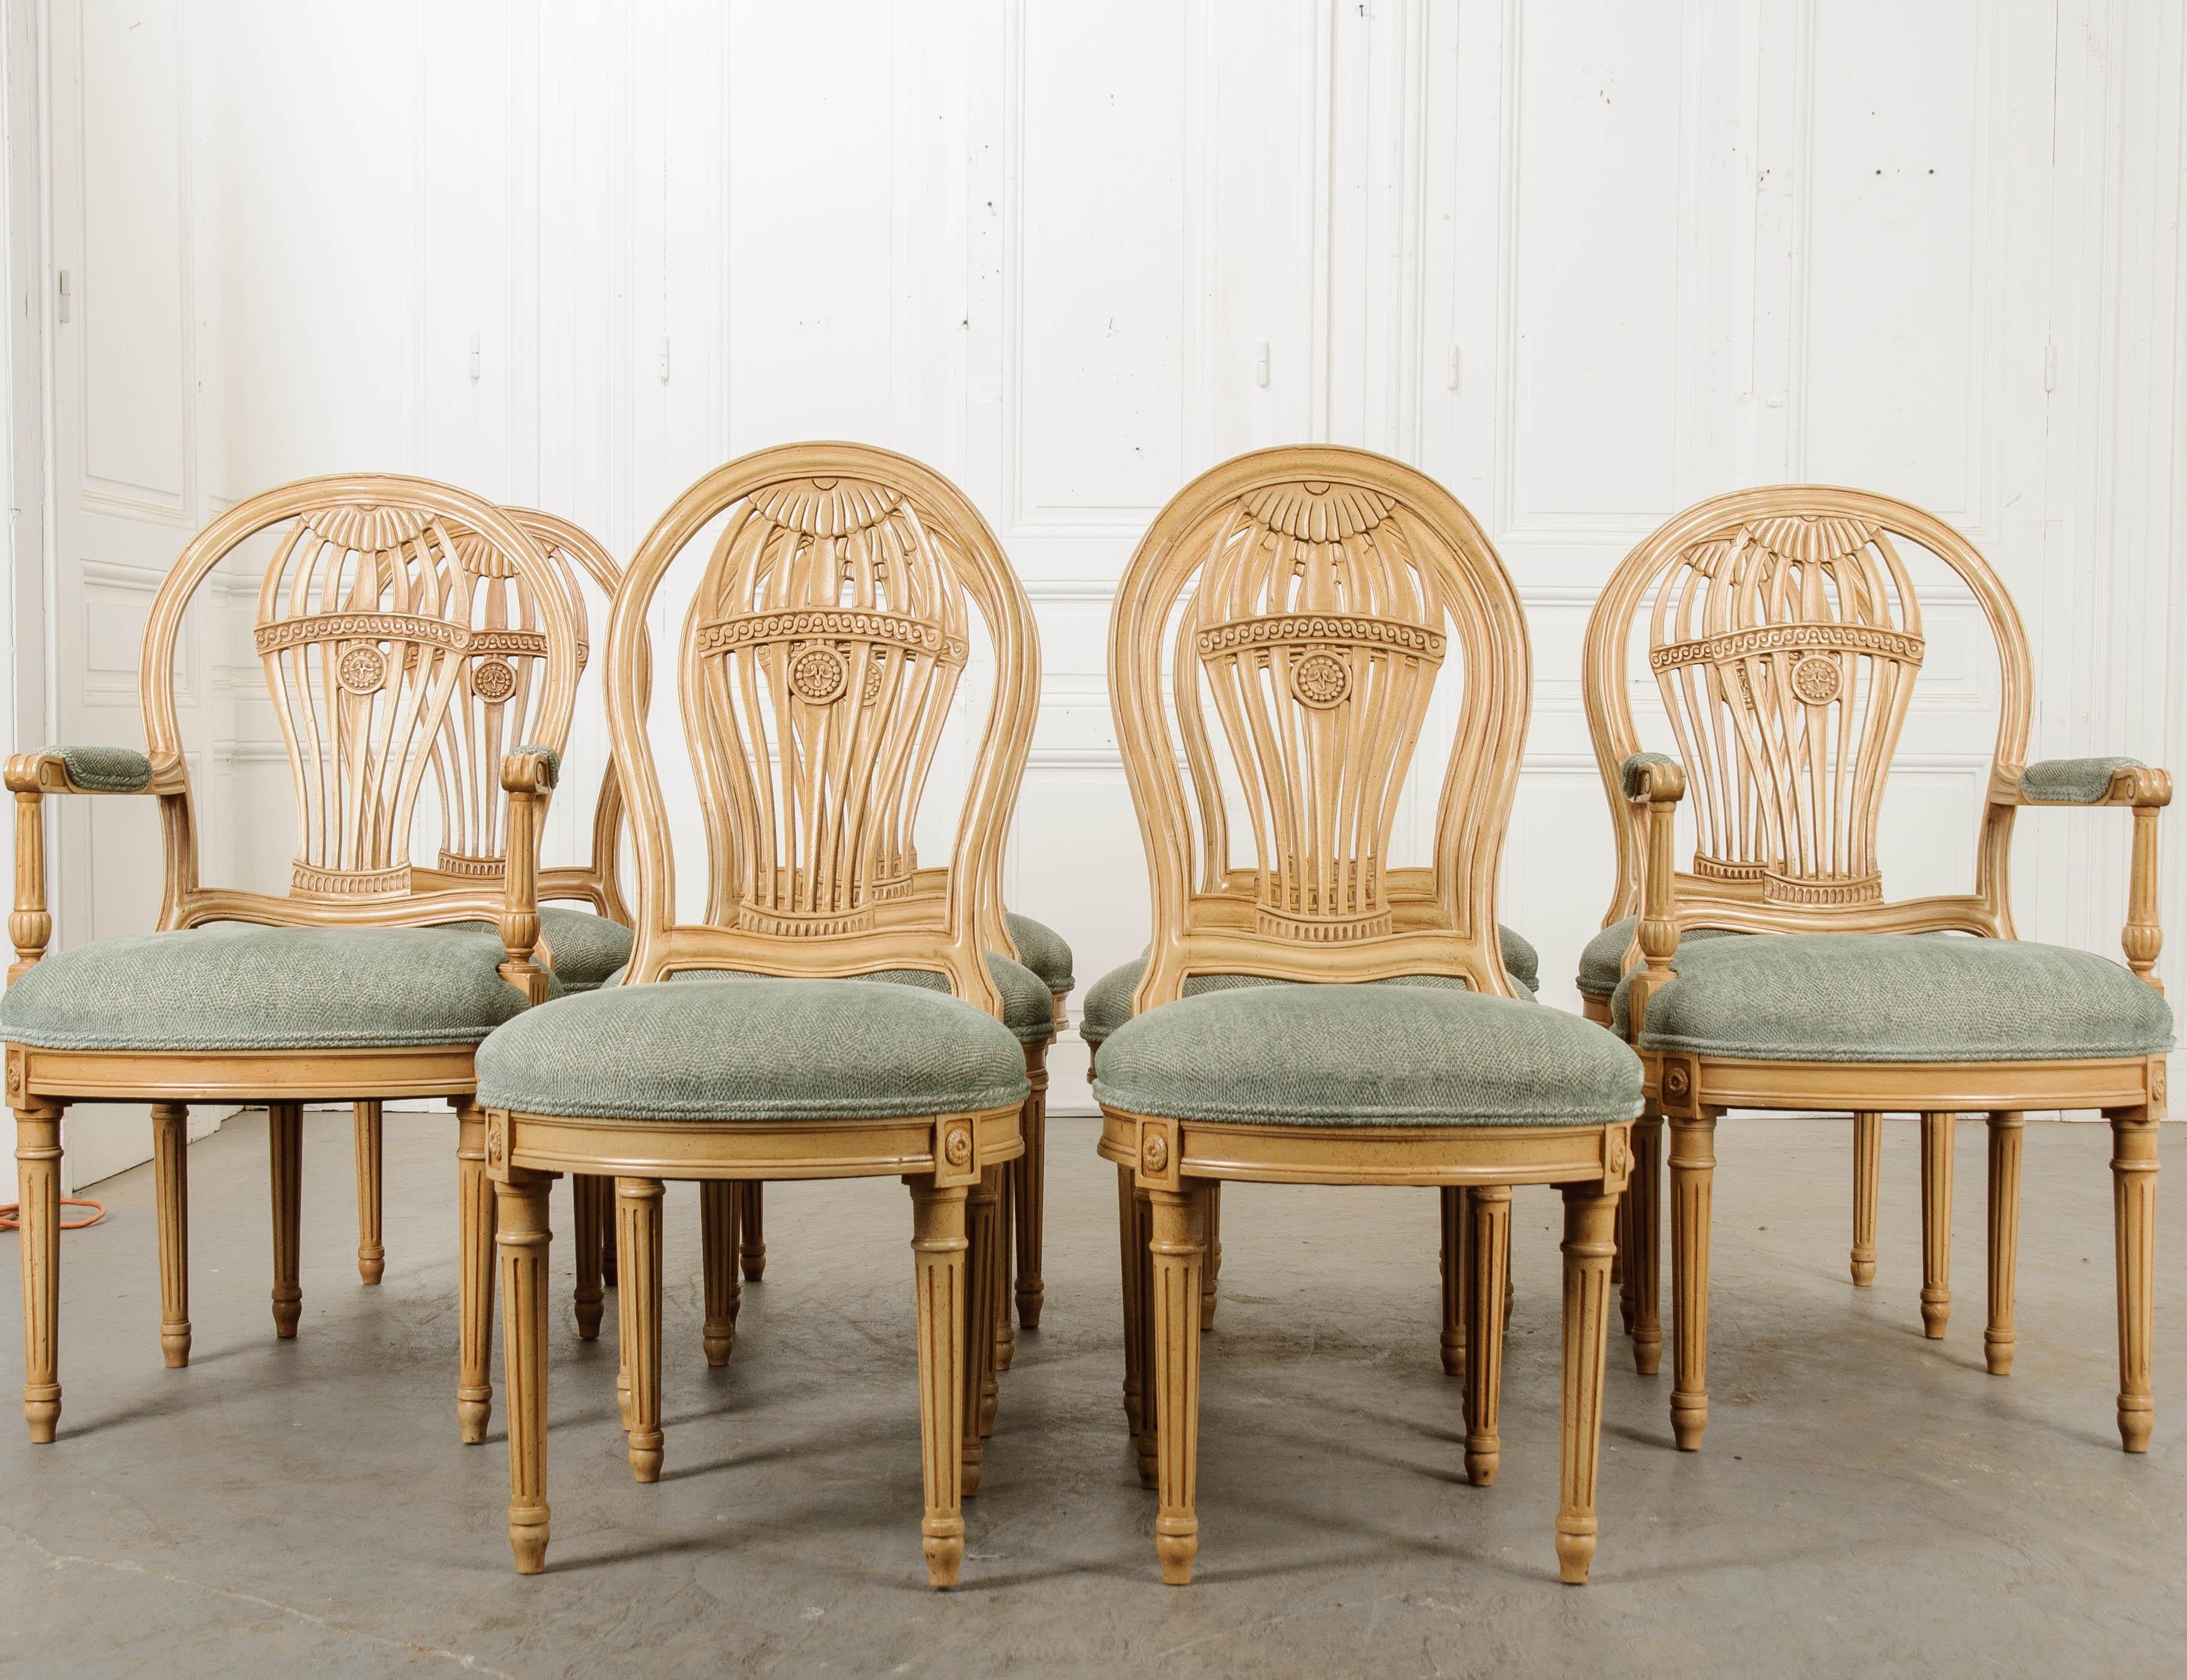 A whimsical set of upholstered French reproduction dining chairs, produced there in the 20th Century. The set contains four side chairs and two armchairs. They have painted frames that are made to appear antique. Their overall style is in accordance